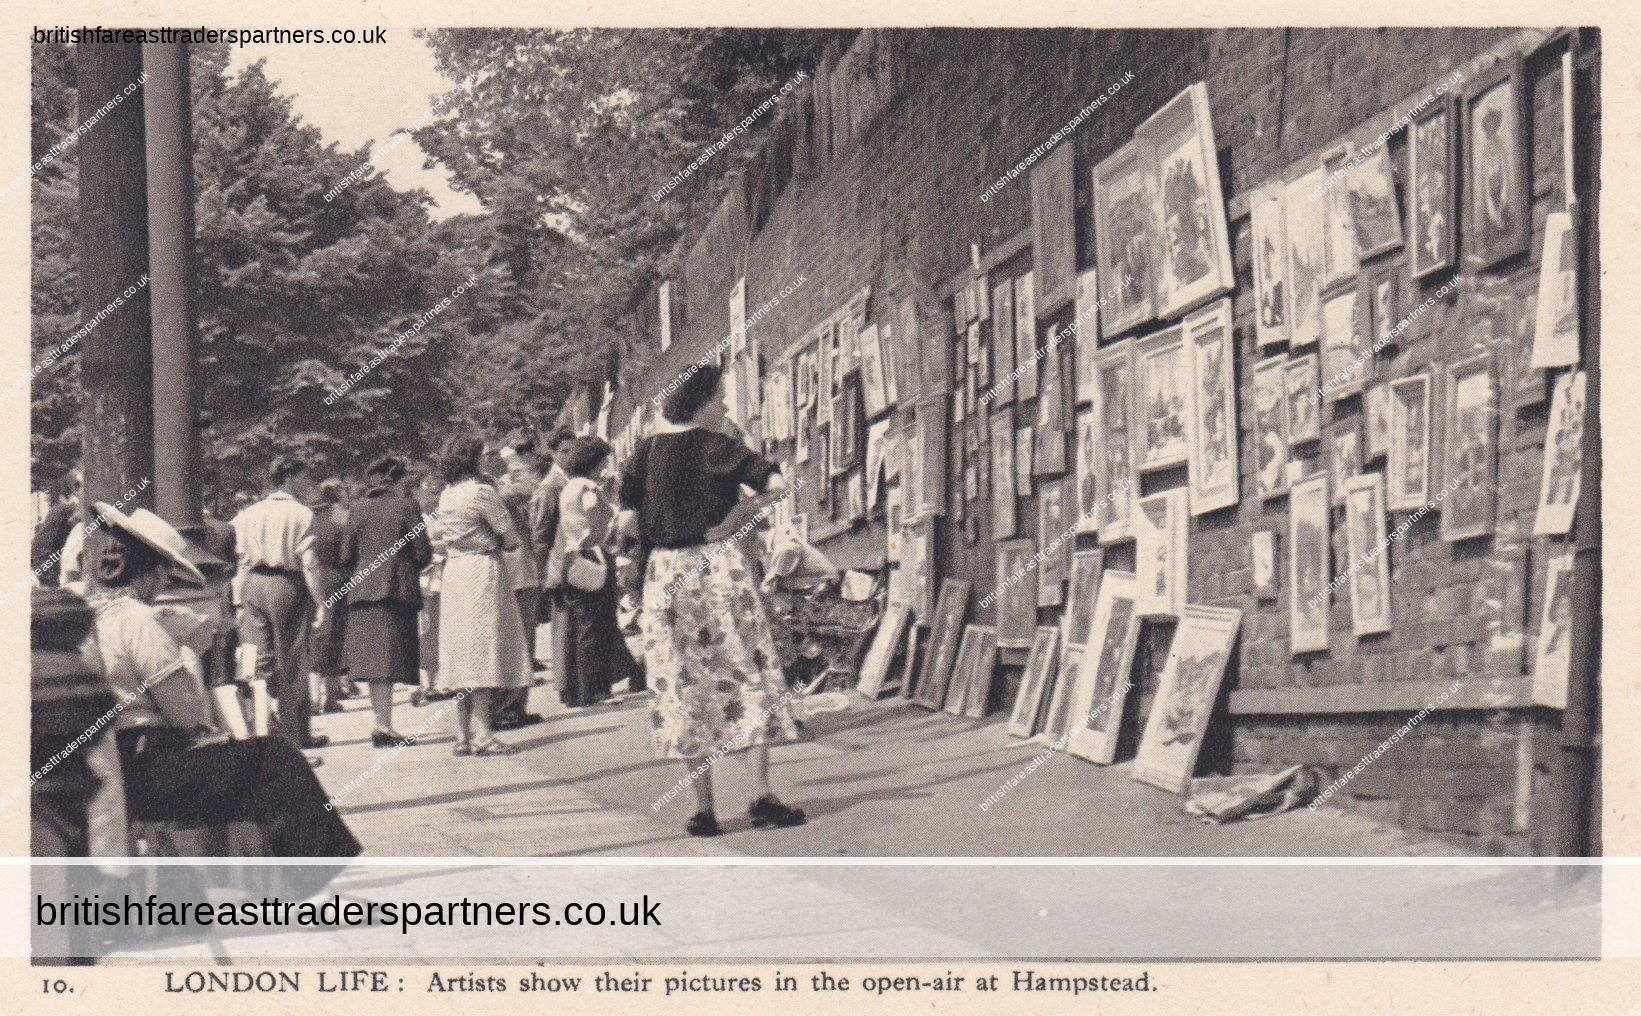 VINTAGE TOPOGRAPHICAL POSTCARD “LONDON LIFE: ARTISTS SHOW THEIR PICTURES IN THE OPEN-AIR AT HAMPSTEAD” LONDON | ENGLAND | UNITED KINGDOM BRITISH | LONDON LIFE | SOCIETY | SOCIAL HISTORY | BUSINESS | MARKETS | ARTISTS | WORKS OF ART FASHION | CULTURE | HERITAGE | LIFESTYLE